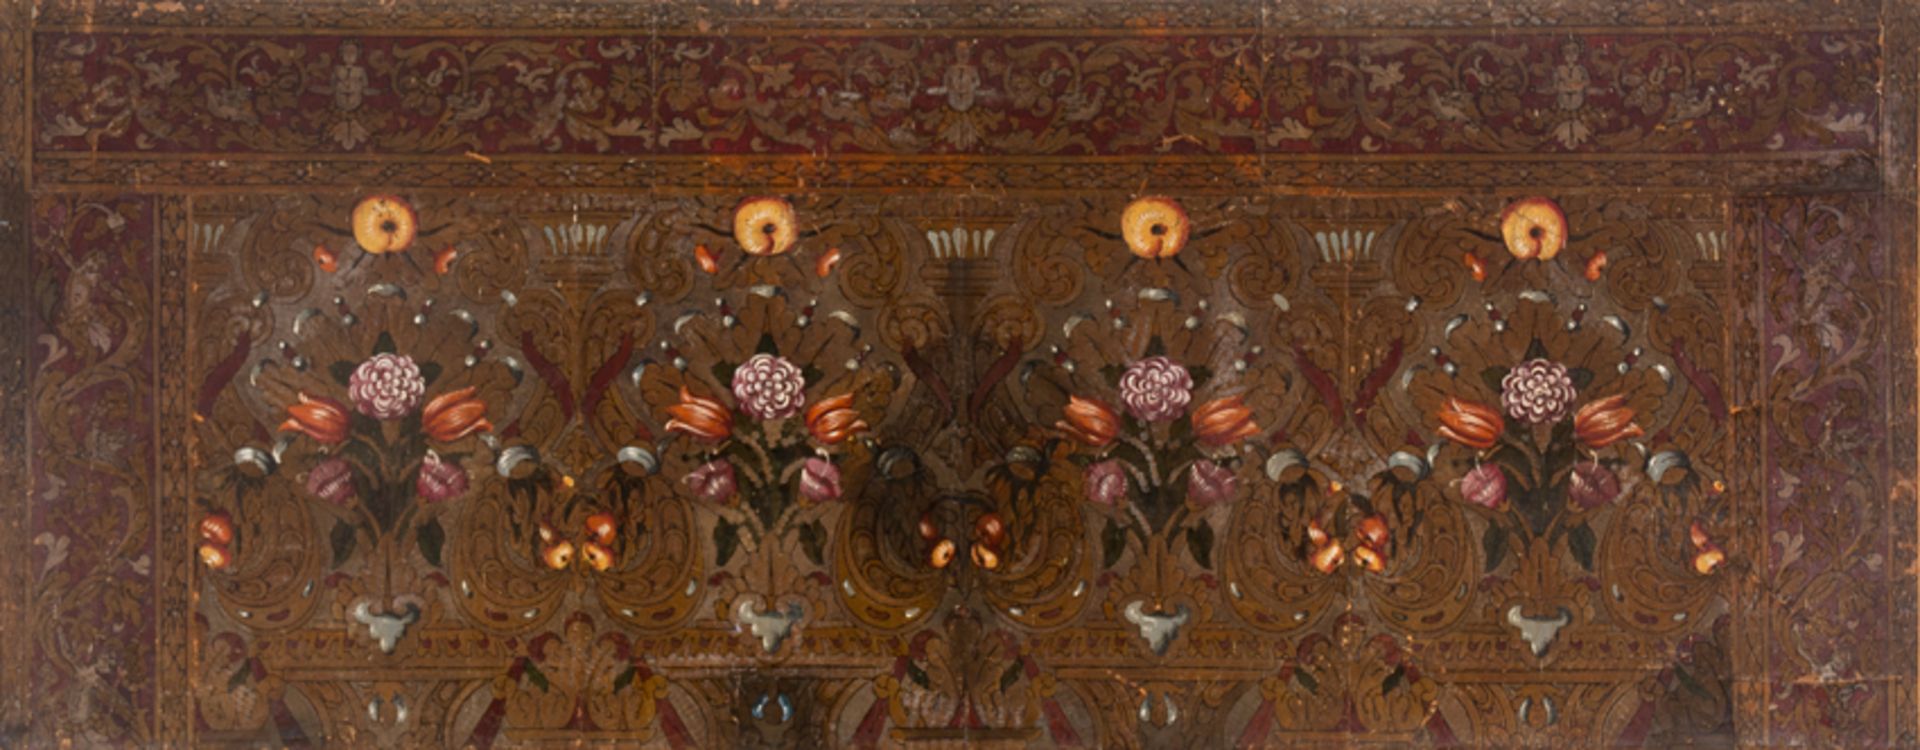 Embossed, engraved, polychromed and gilded cordovan leather. Possibly Flemish. 18th century.